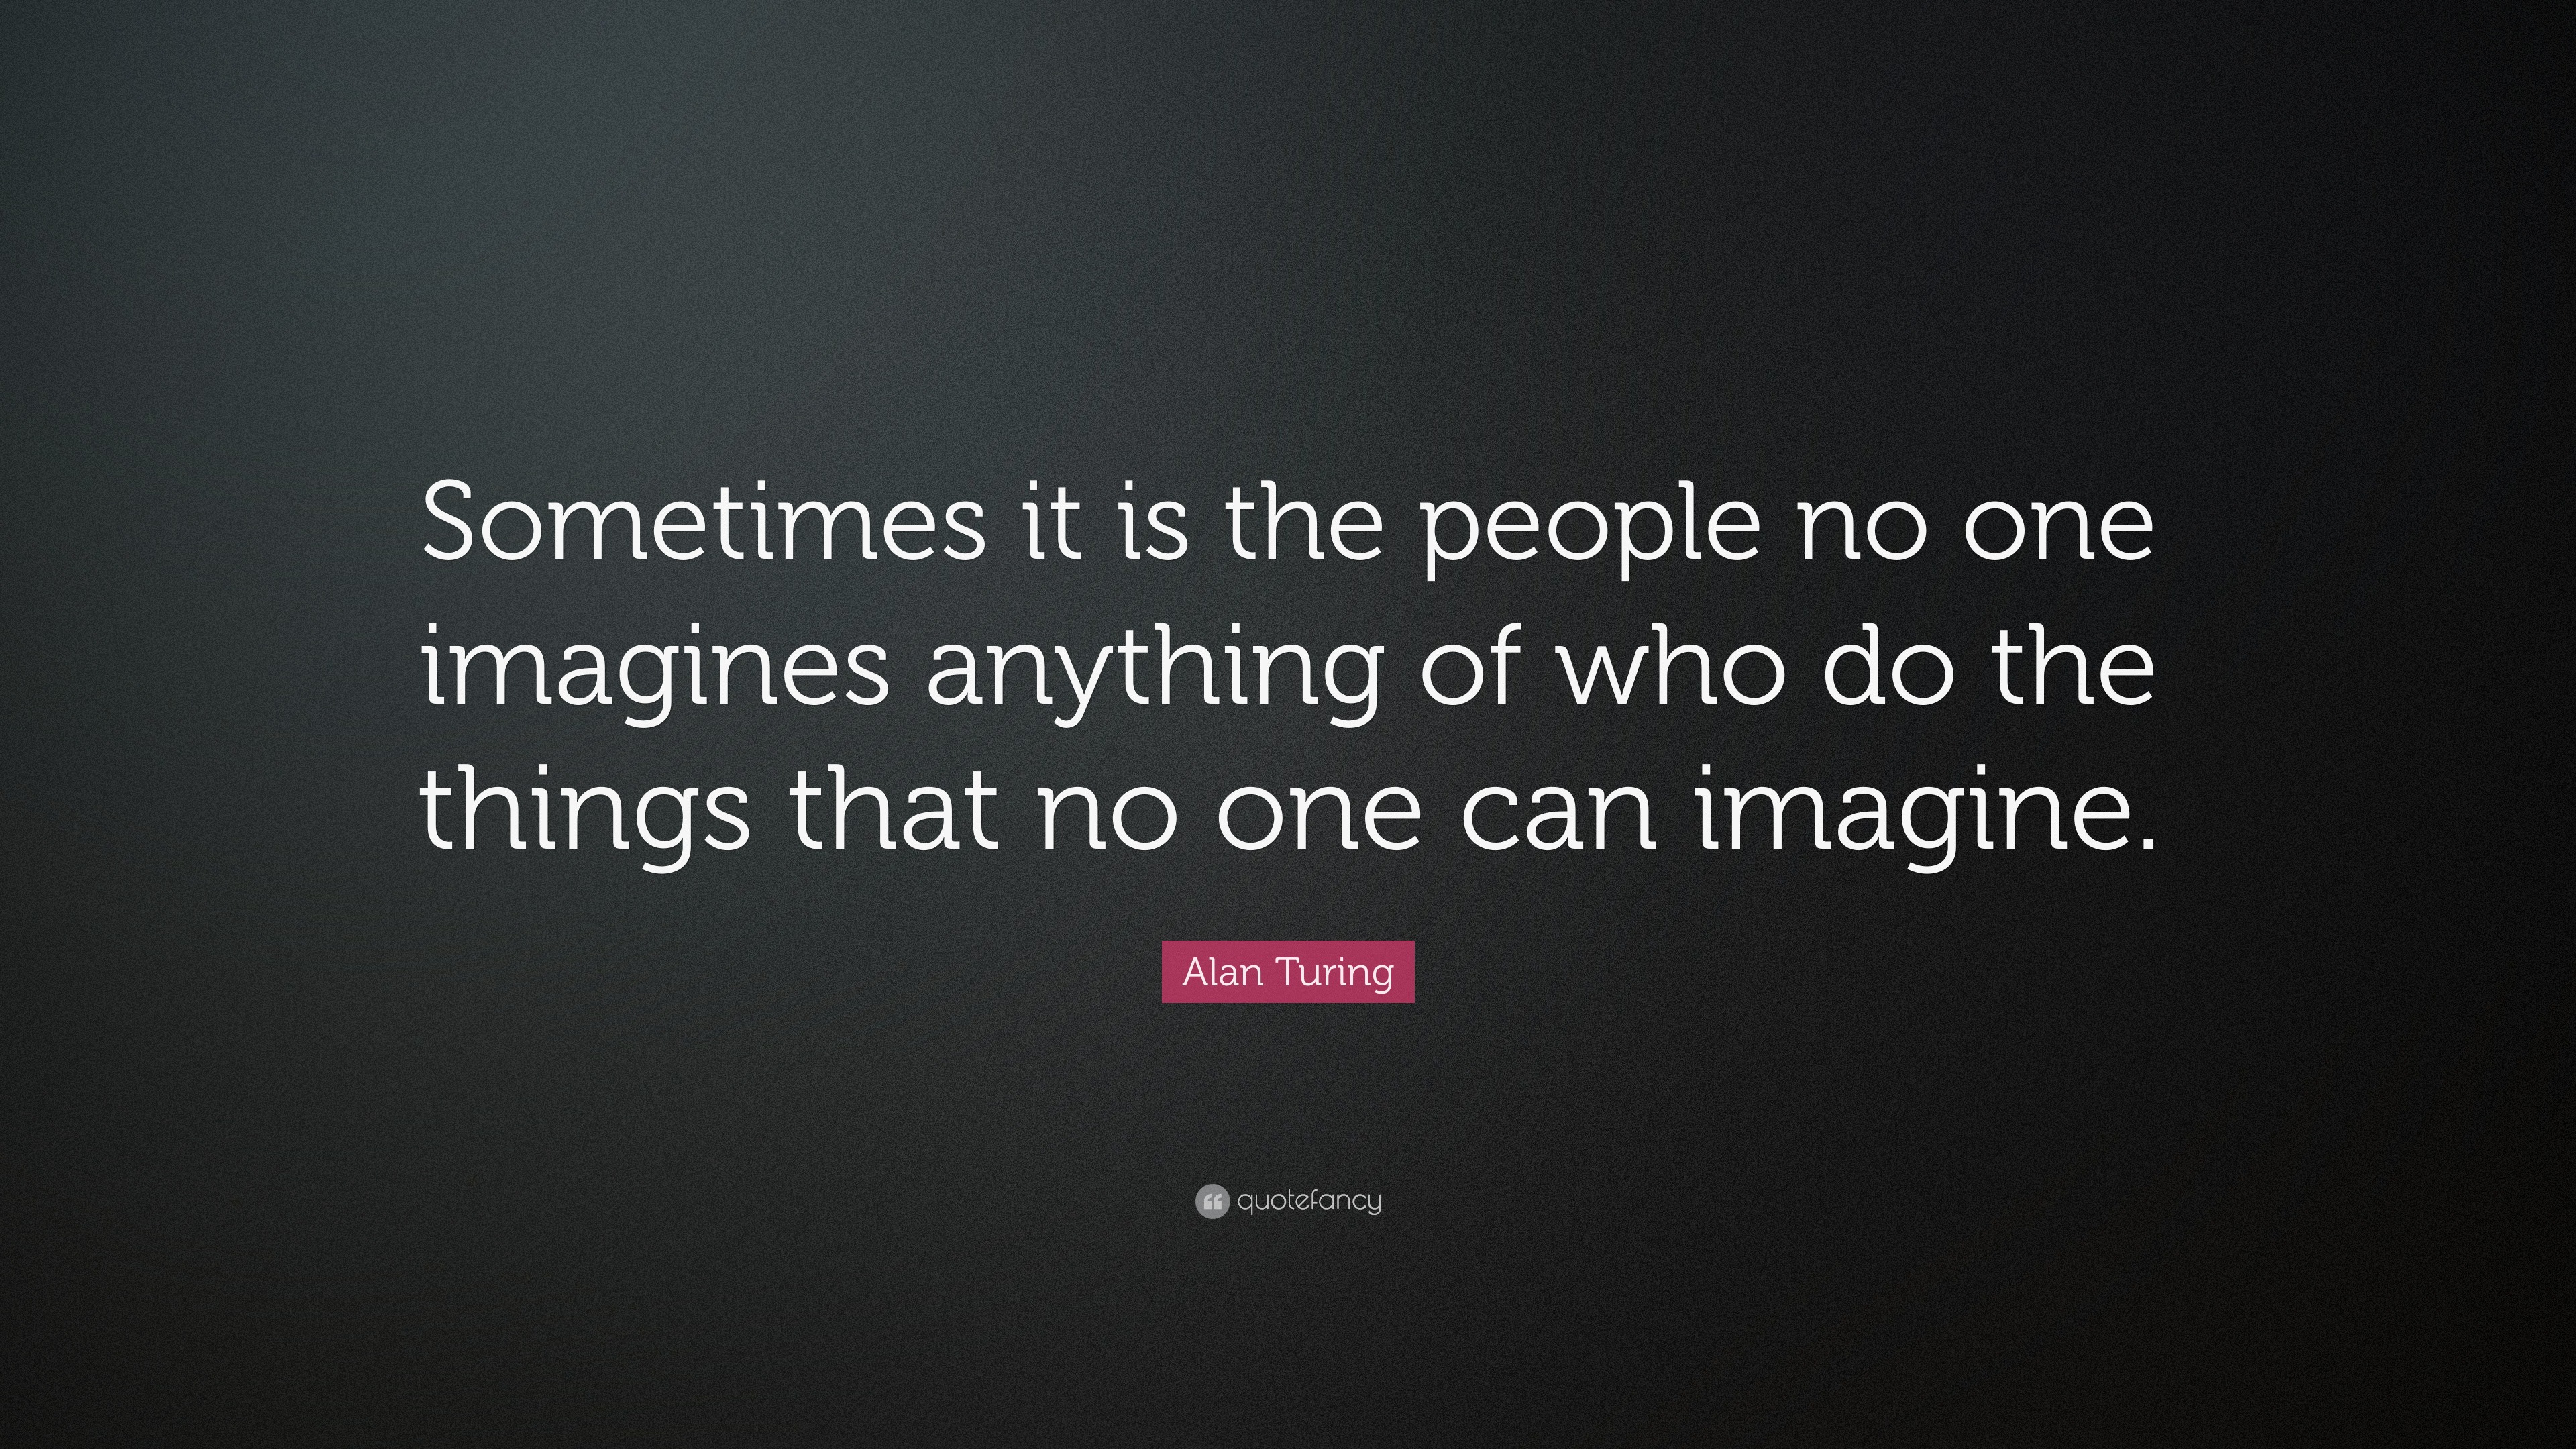 Alan Turing Quote: “Sometimes it is the people no one imagines anything ...